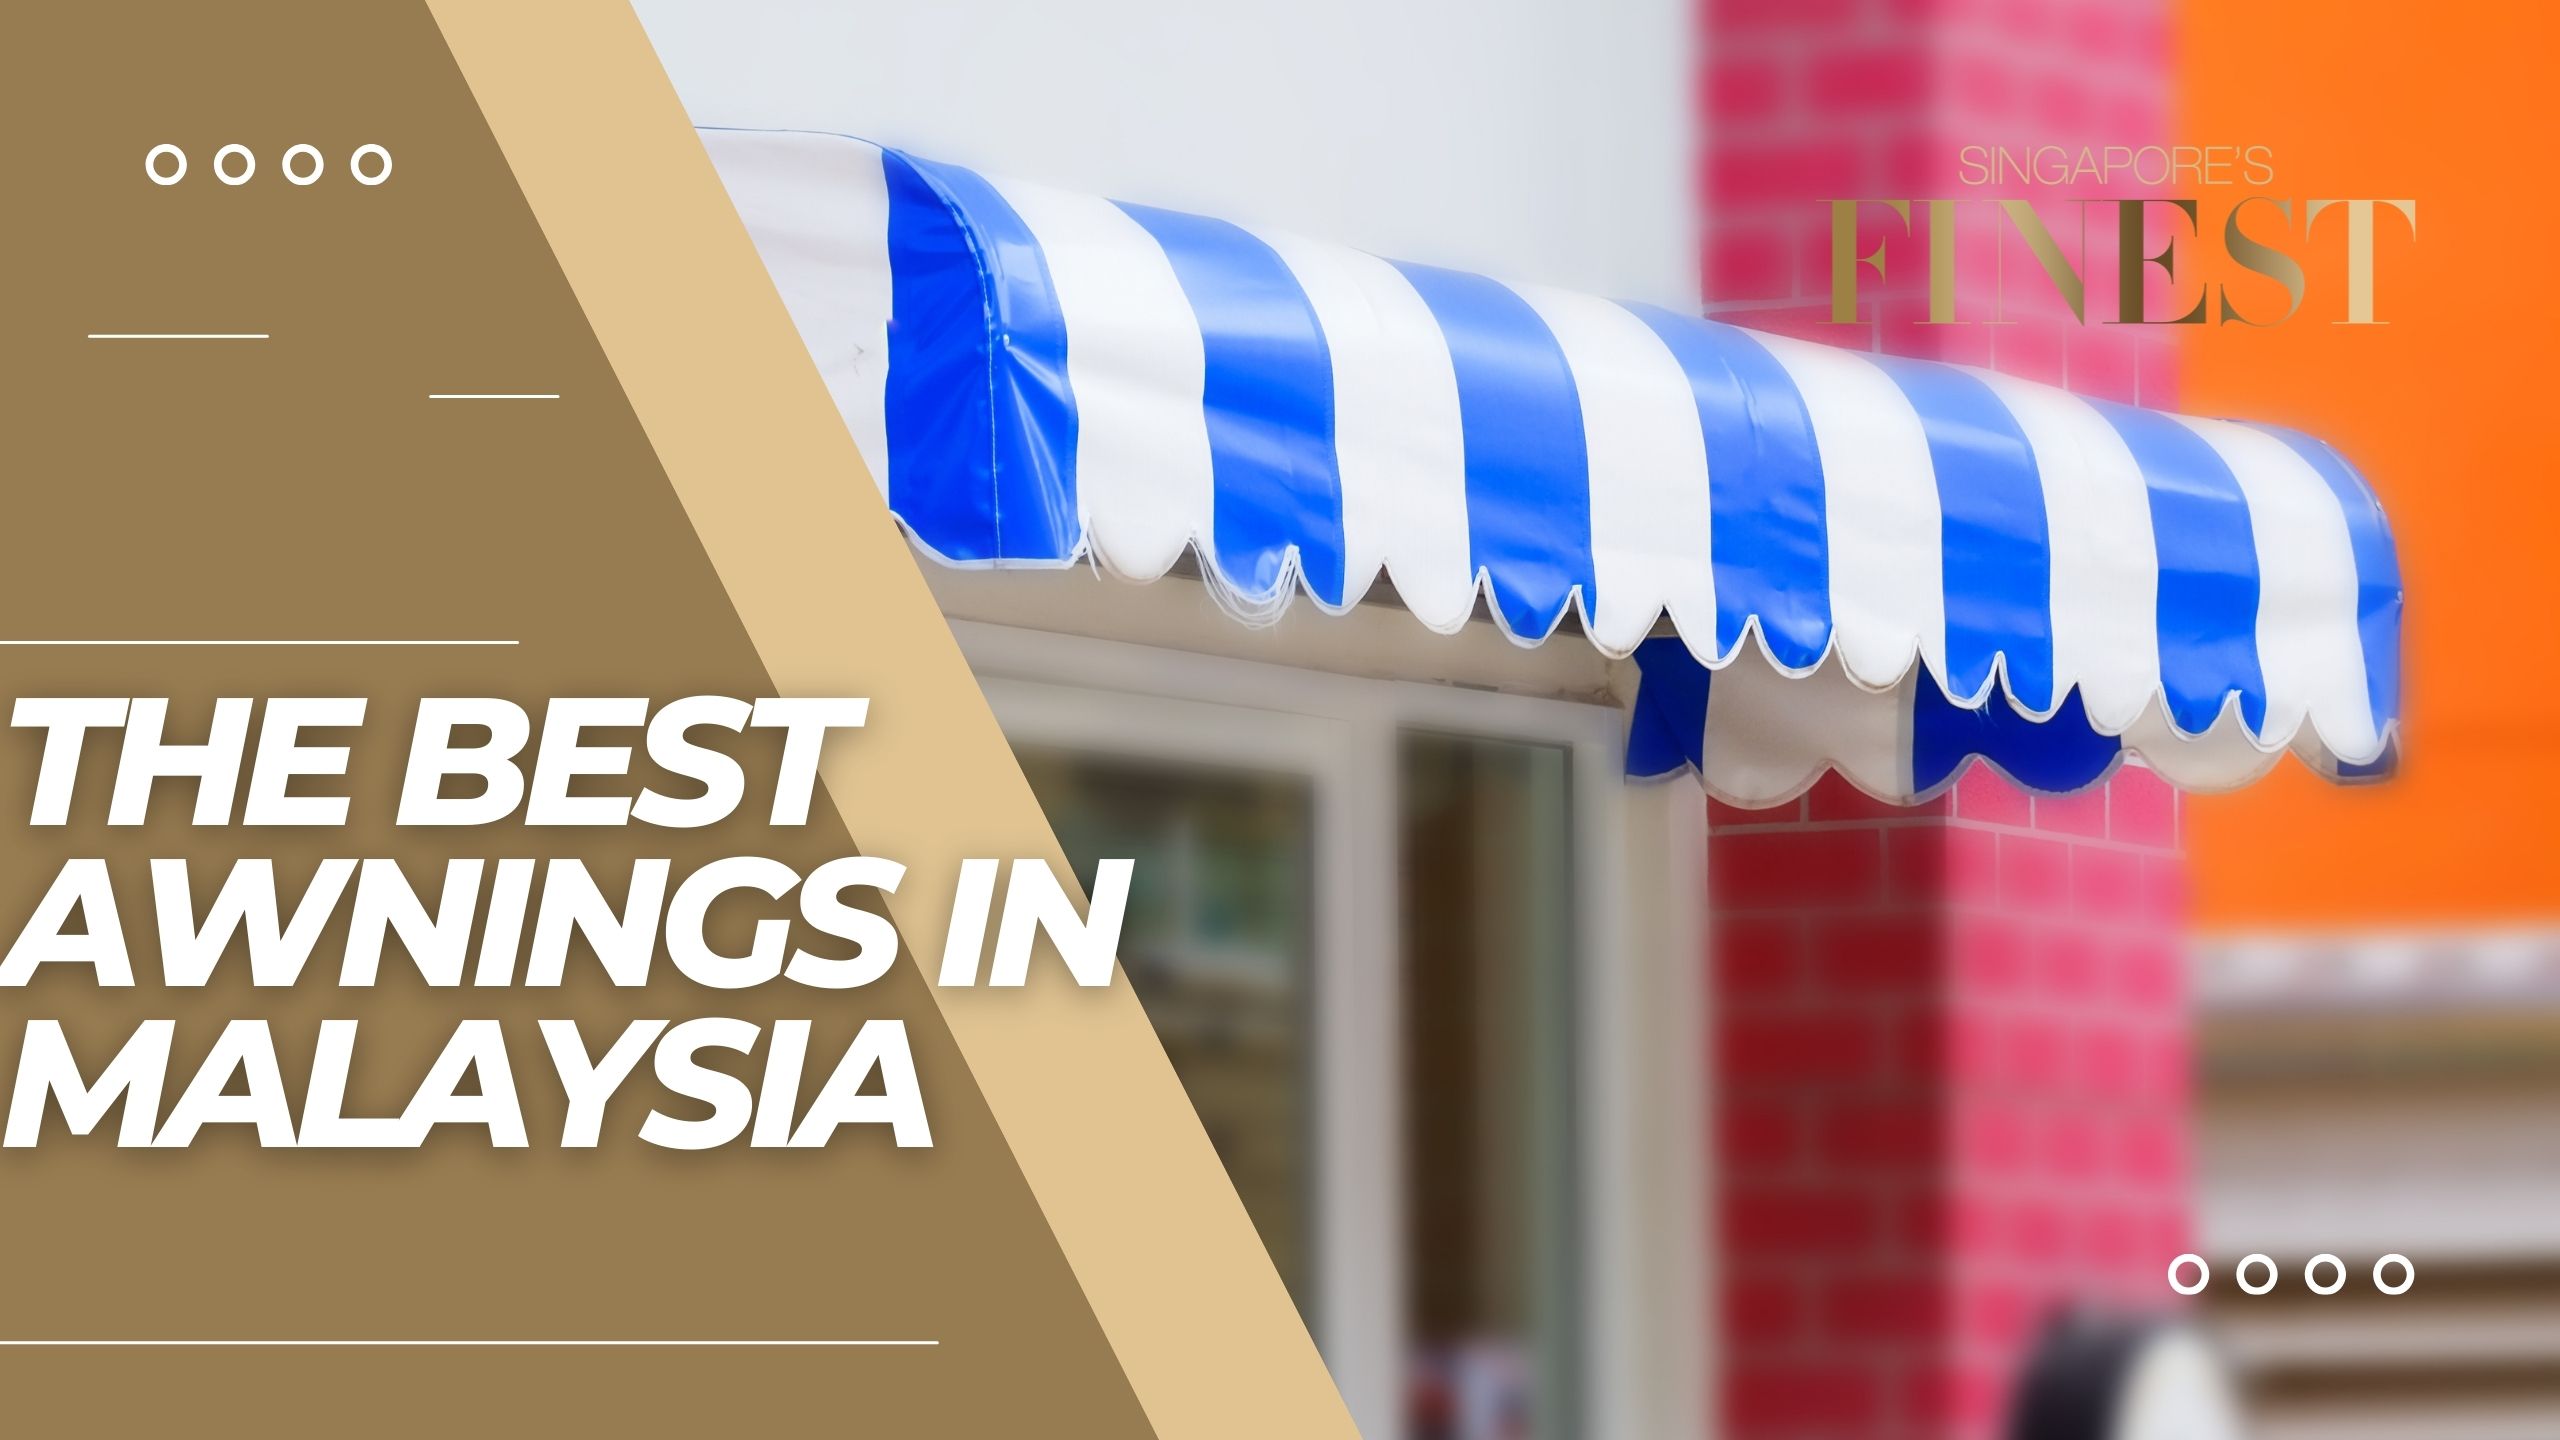 The Finest Awnings in Malaysia